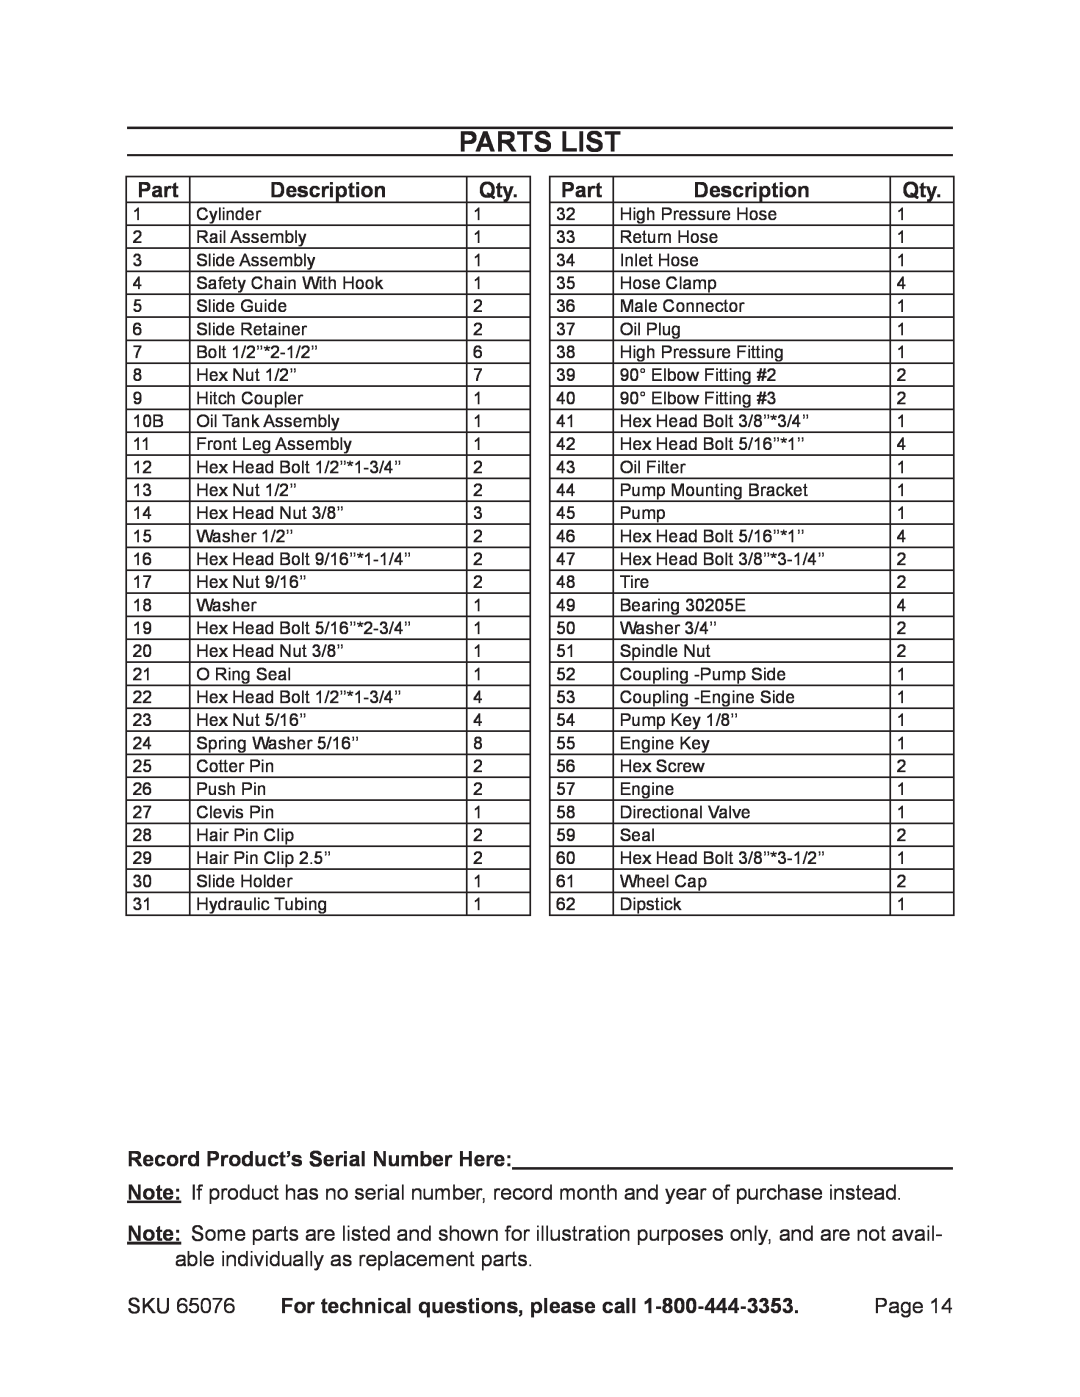 Harbor Freight Tools 65076 manual Parts list, Description, Record Product’s Serial Number Here 